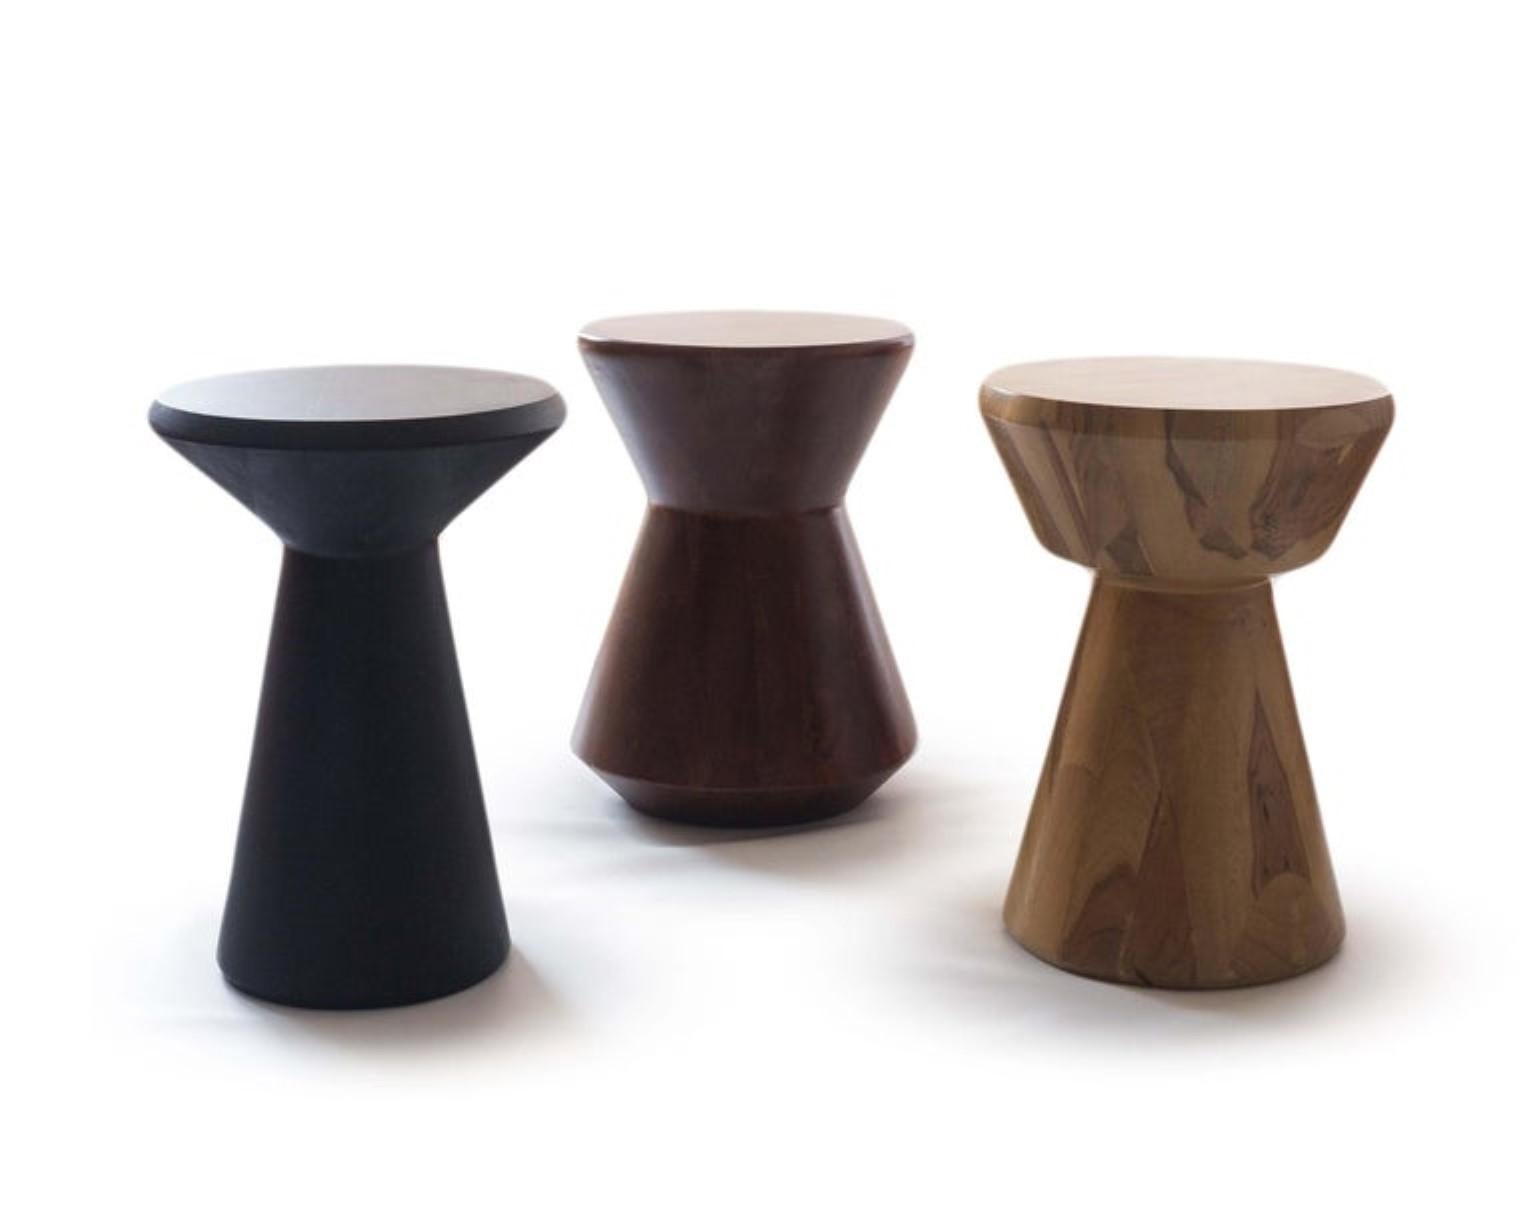 Set of 3 stools by Camilo Andres Rodriguez Marquez
Dimensions: D 30 x W 30 x H 40 cm
Material: Wood


These stools are designed with the intention that the viewer will appreciate its gentle details: veins, grains, streaks and groves. The stool